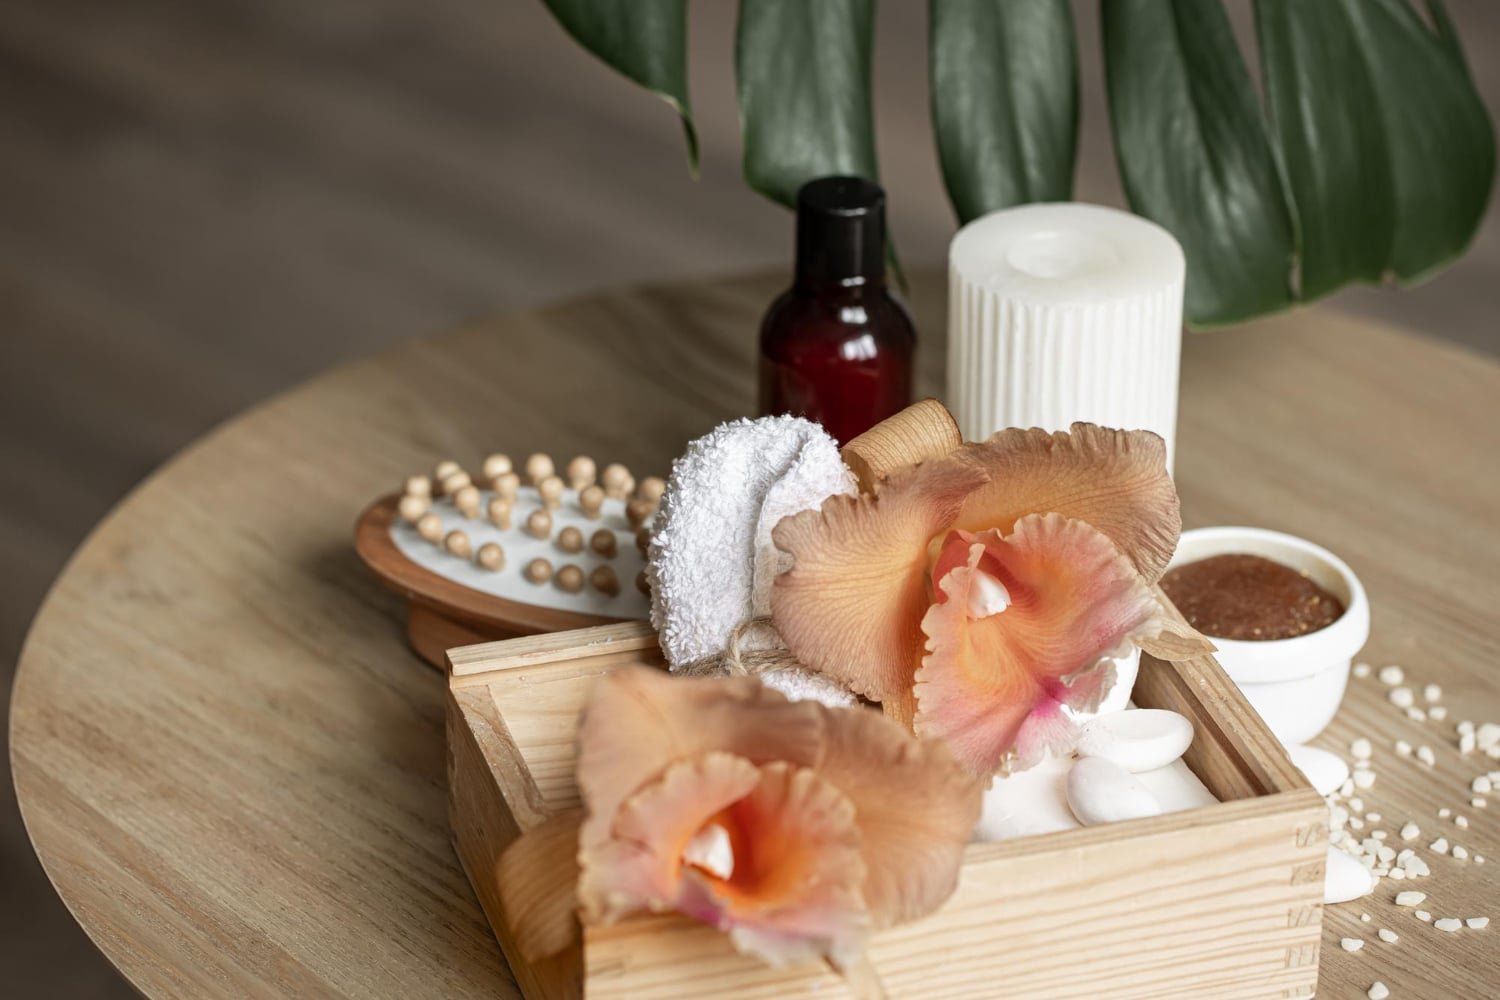 Enjoy A Luxurious Bathing Experience With Bottger.nl’s Natural Bath And Body Products